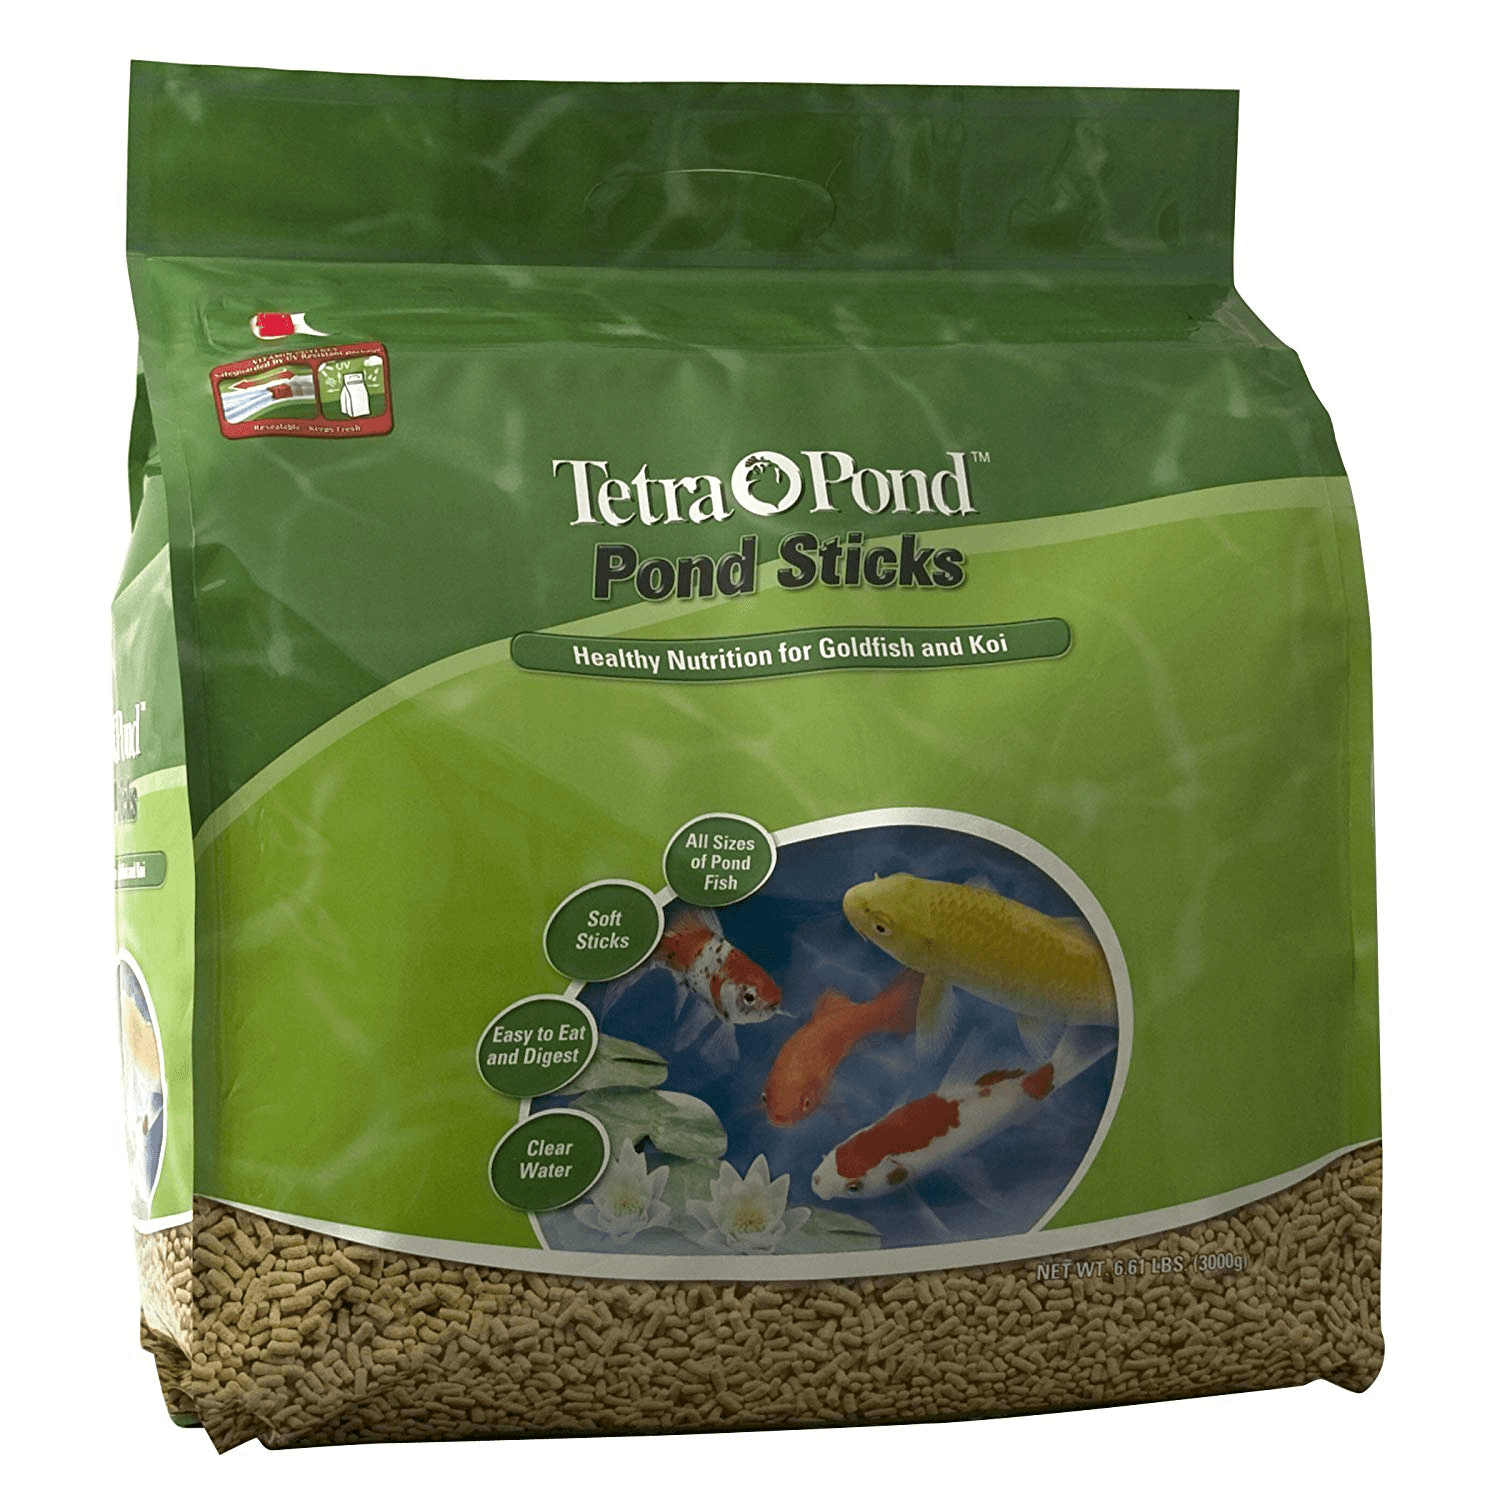 Tetra Pond Multi Mix Fish Food  Complete Daily Koi Diet Nutrition